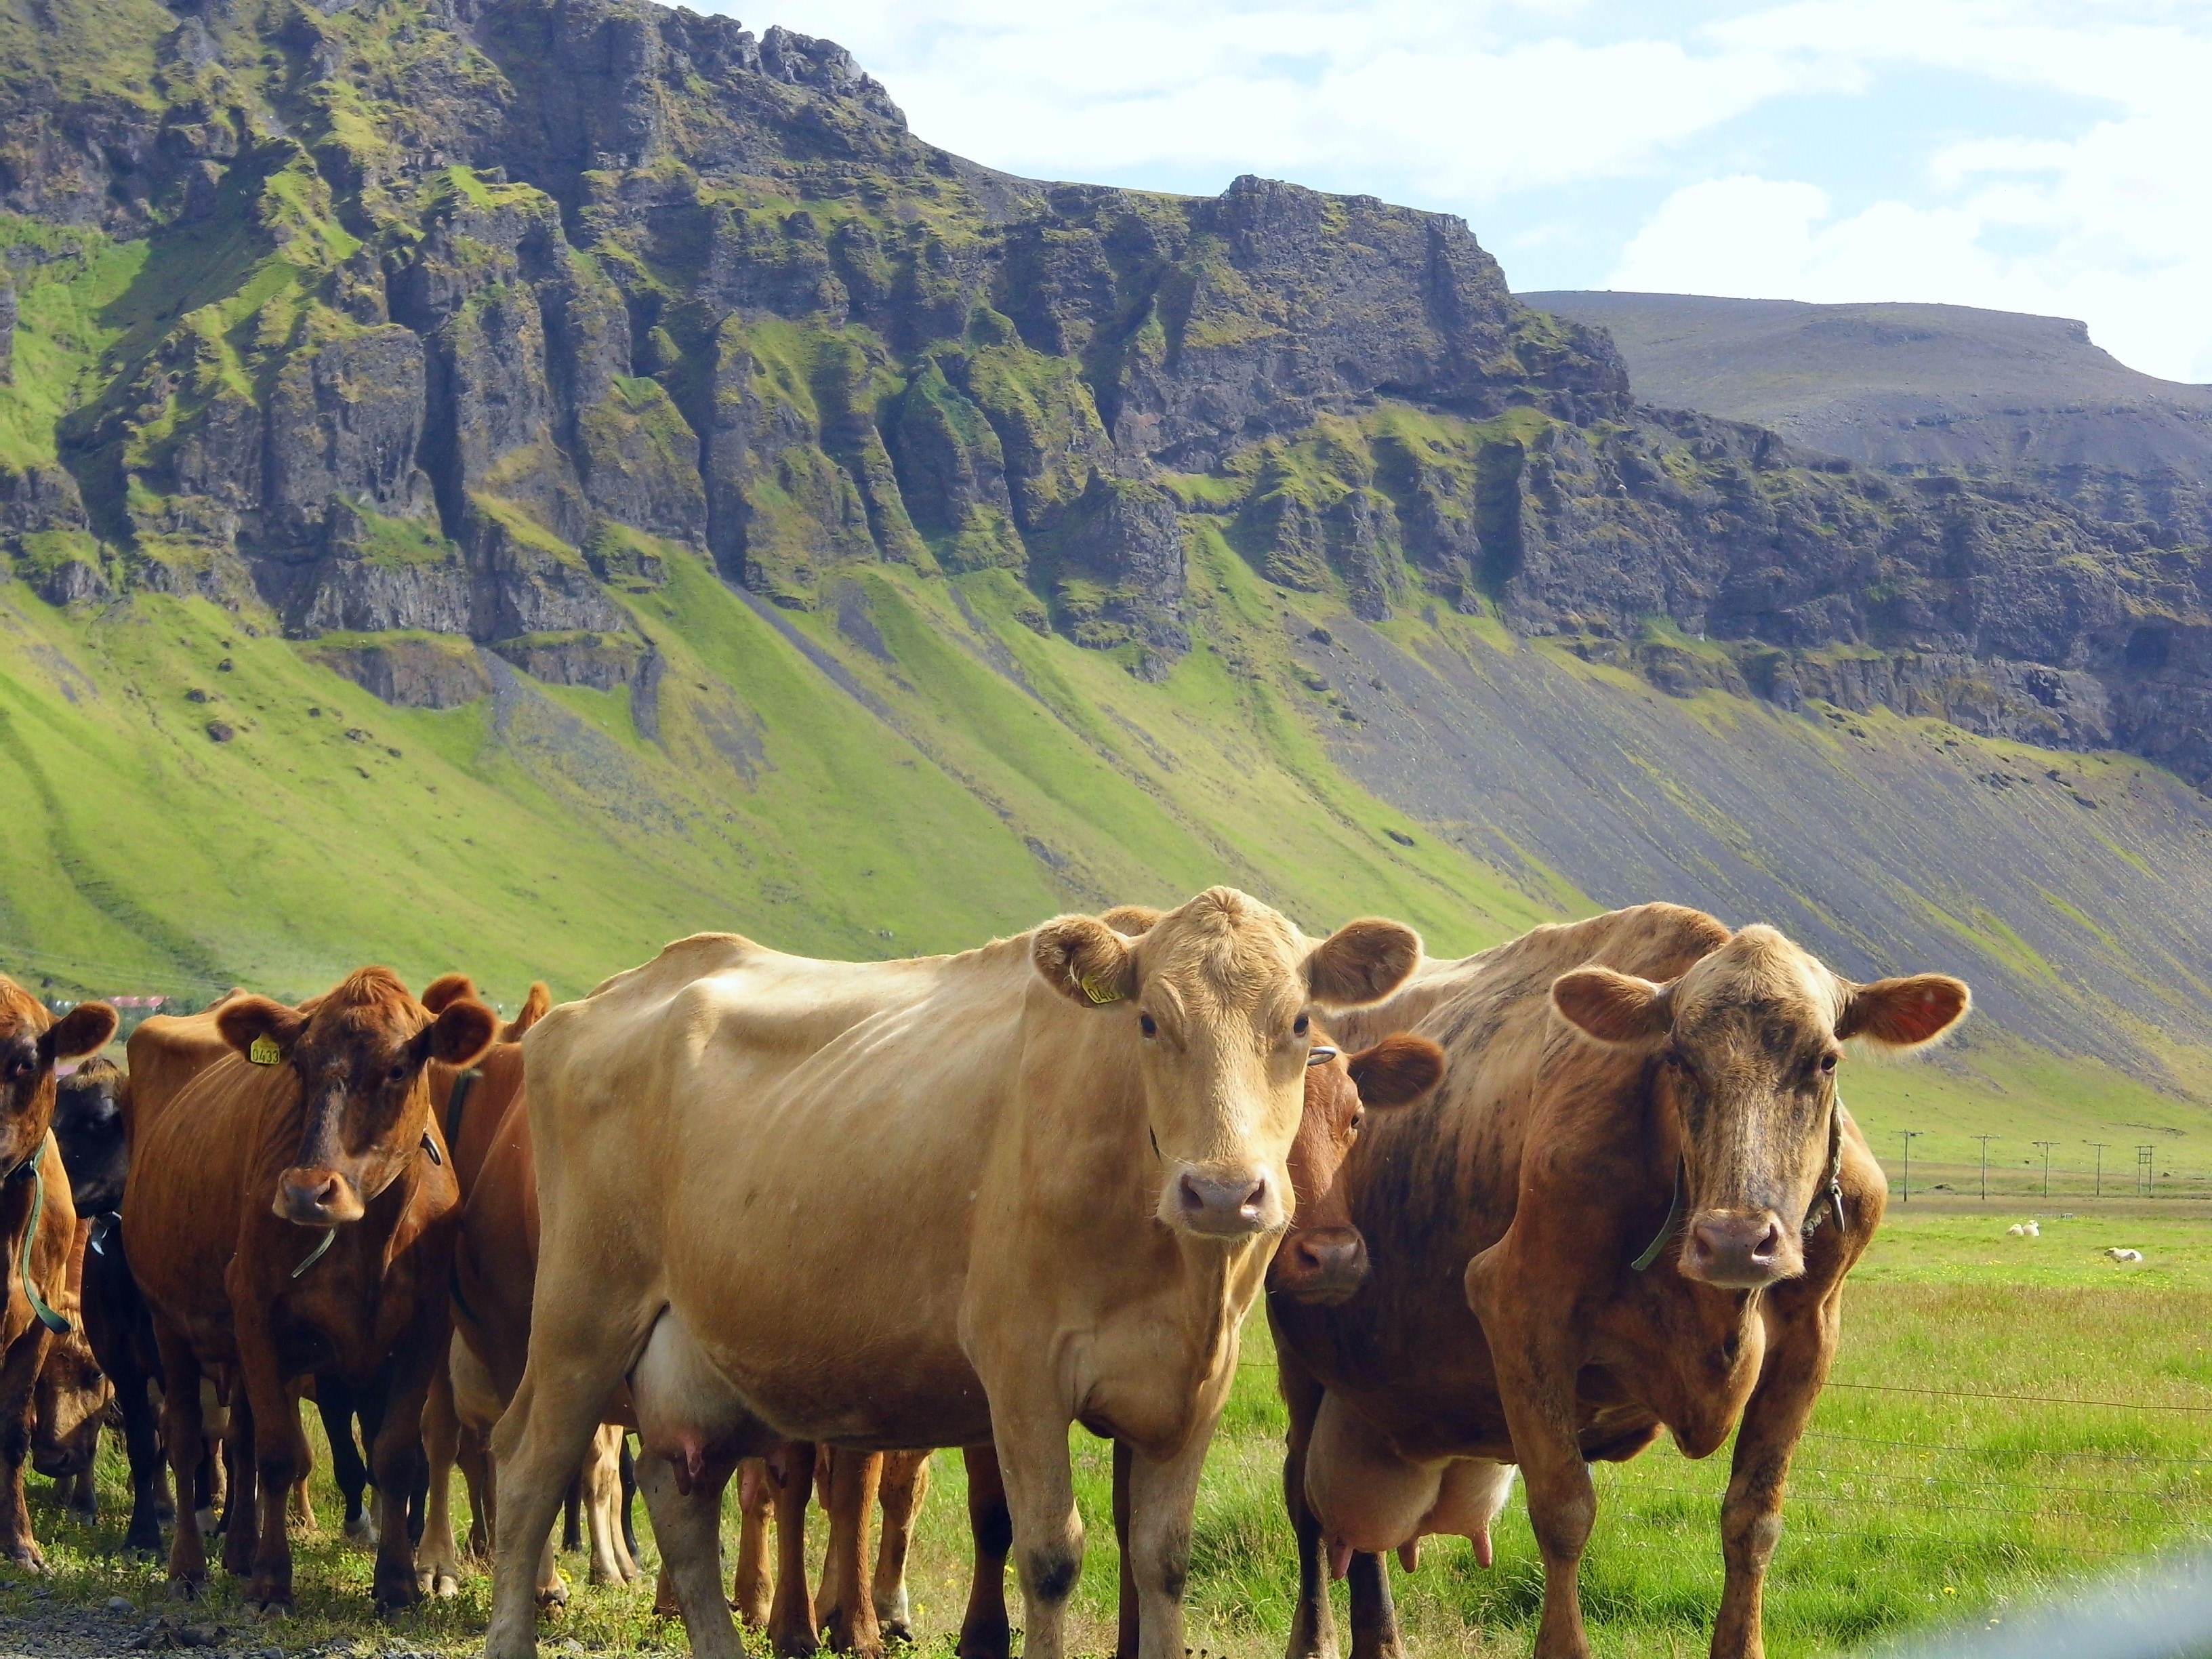 Cow, Farm, Animal, Meat, Beef, Cows, mountain, livestock